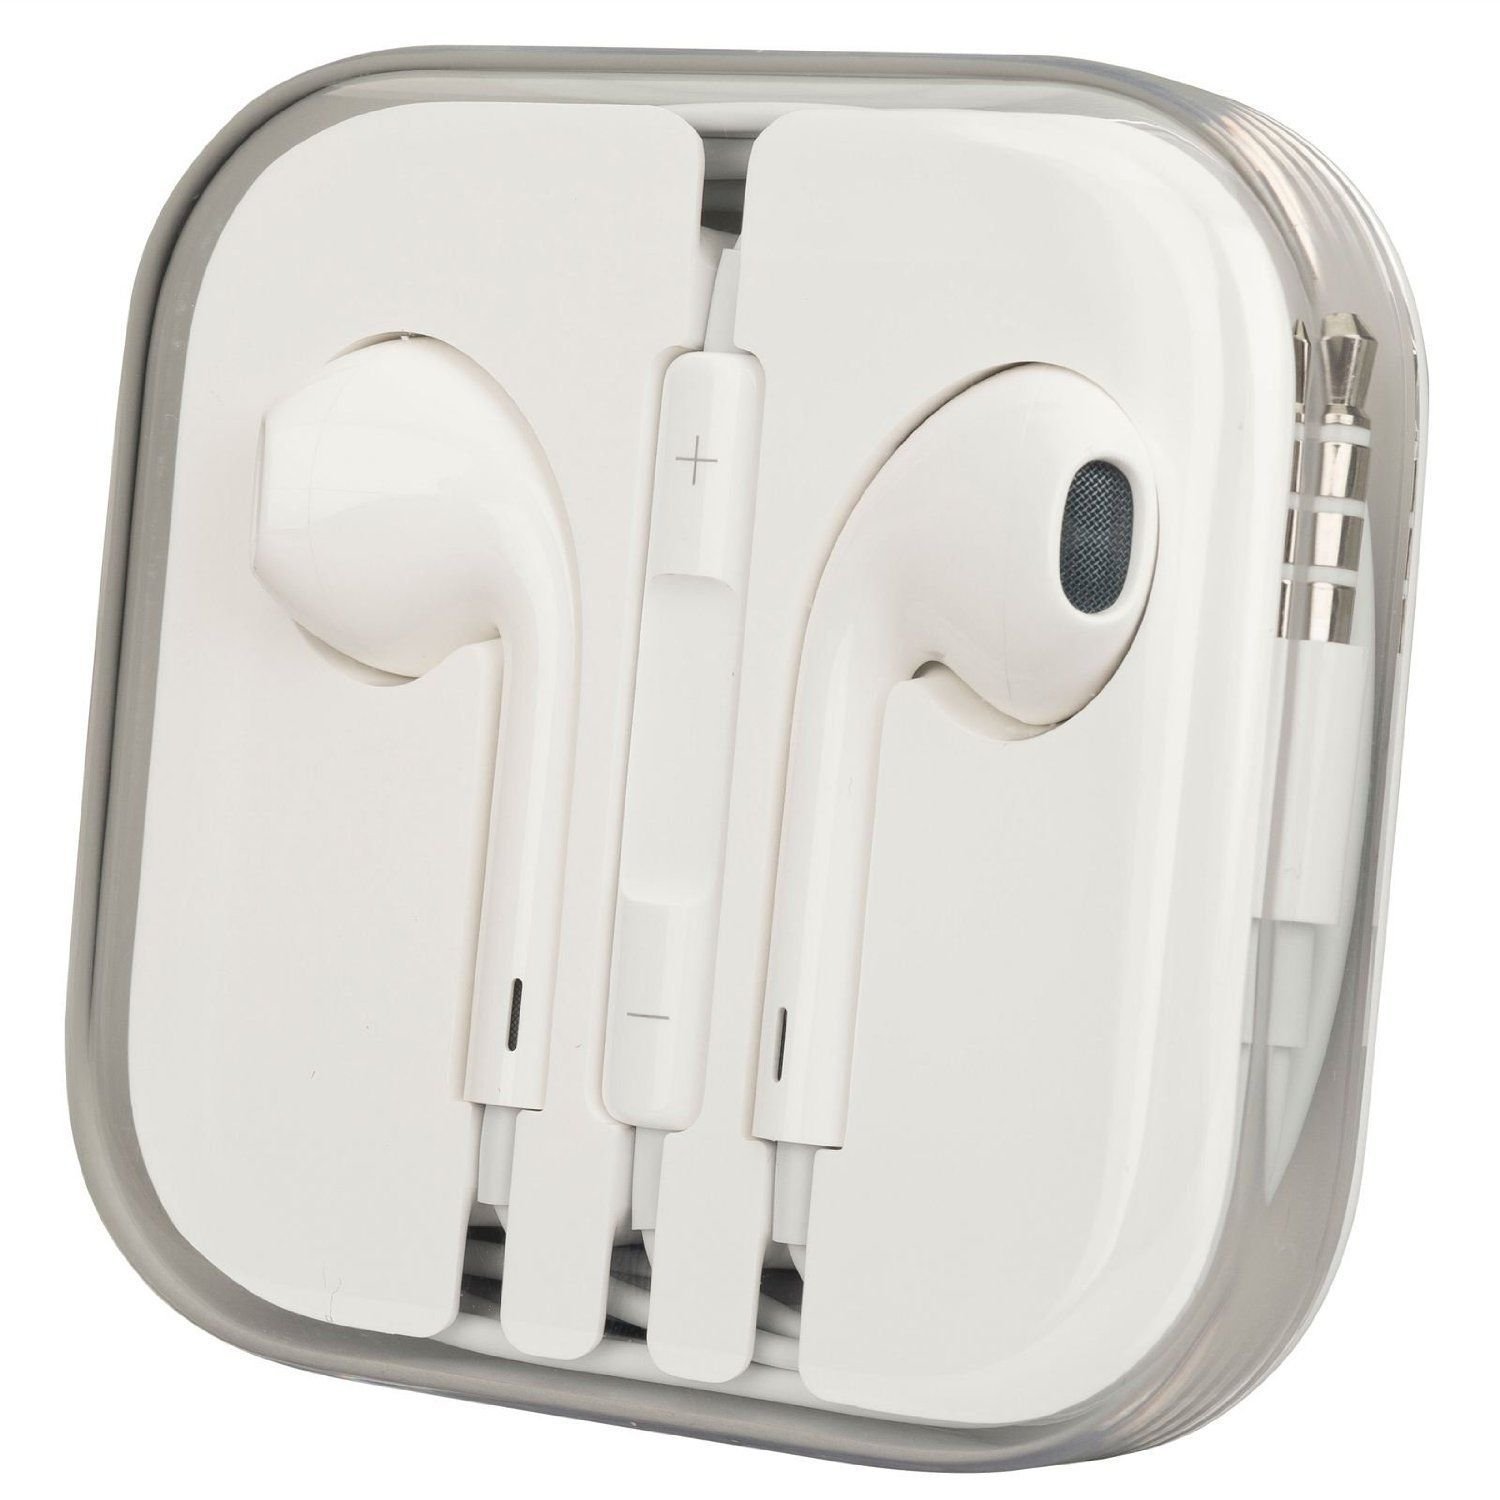 New Genuine Apple Md827ll A Earpods Earphones For Iphone 6 5 4s Remote